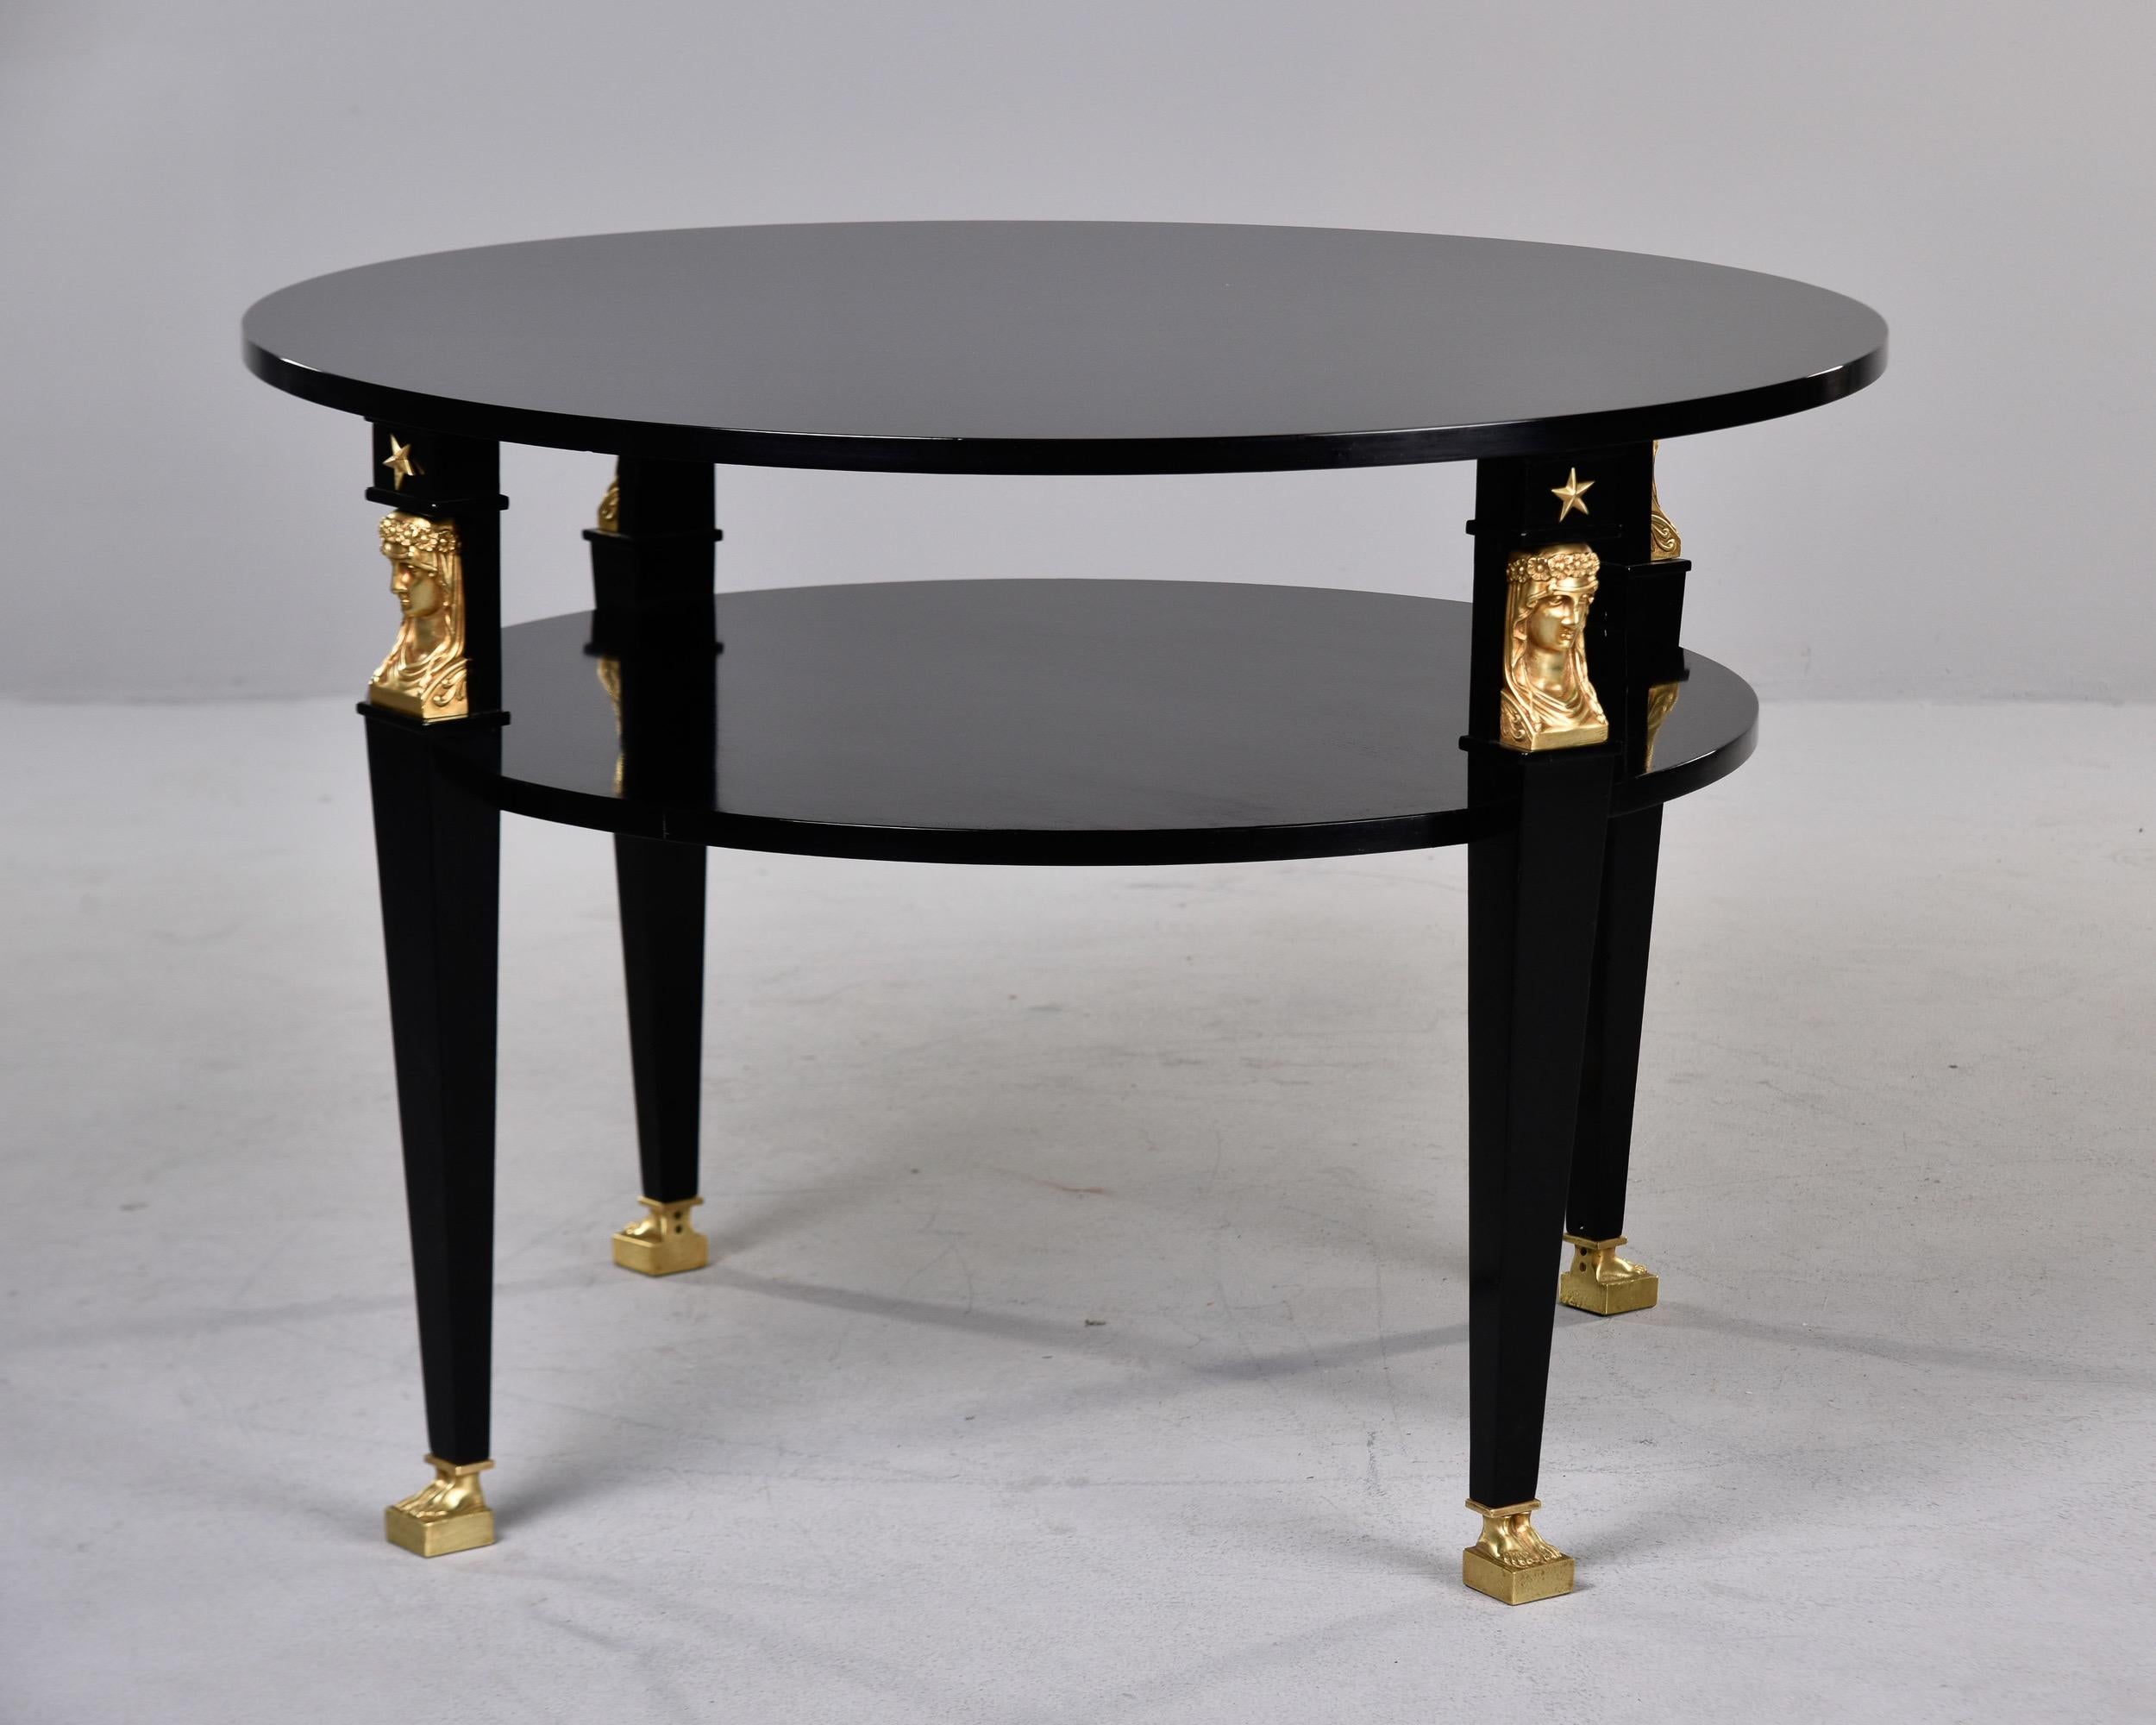 French 19th C Empire Ebonised Round Table with Brass Figural Mounts For Sale